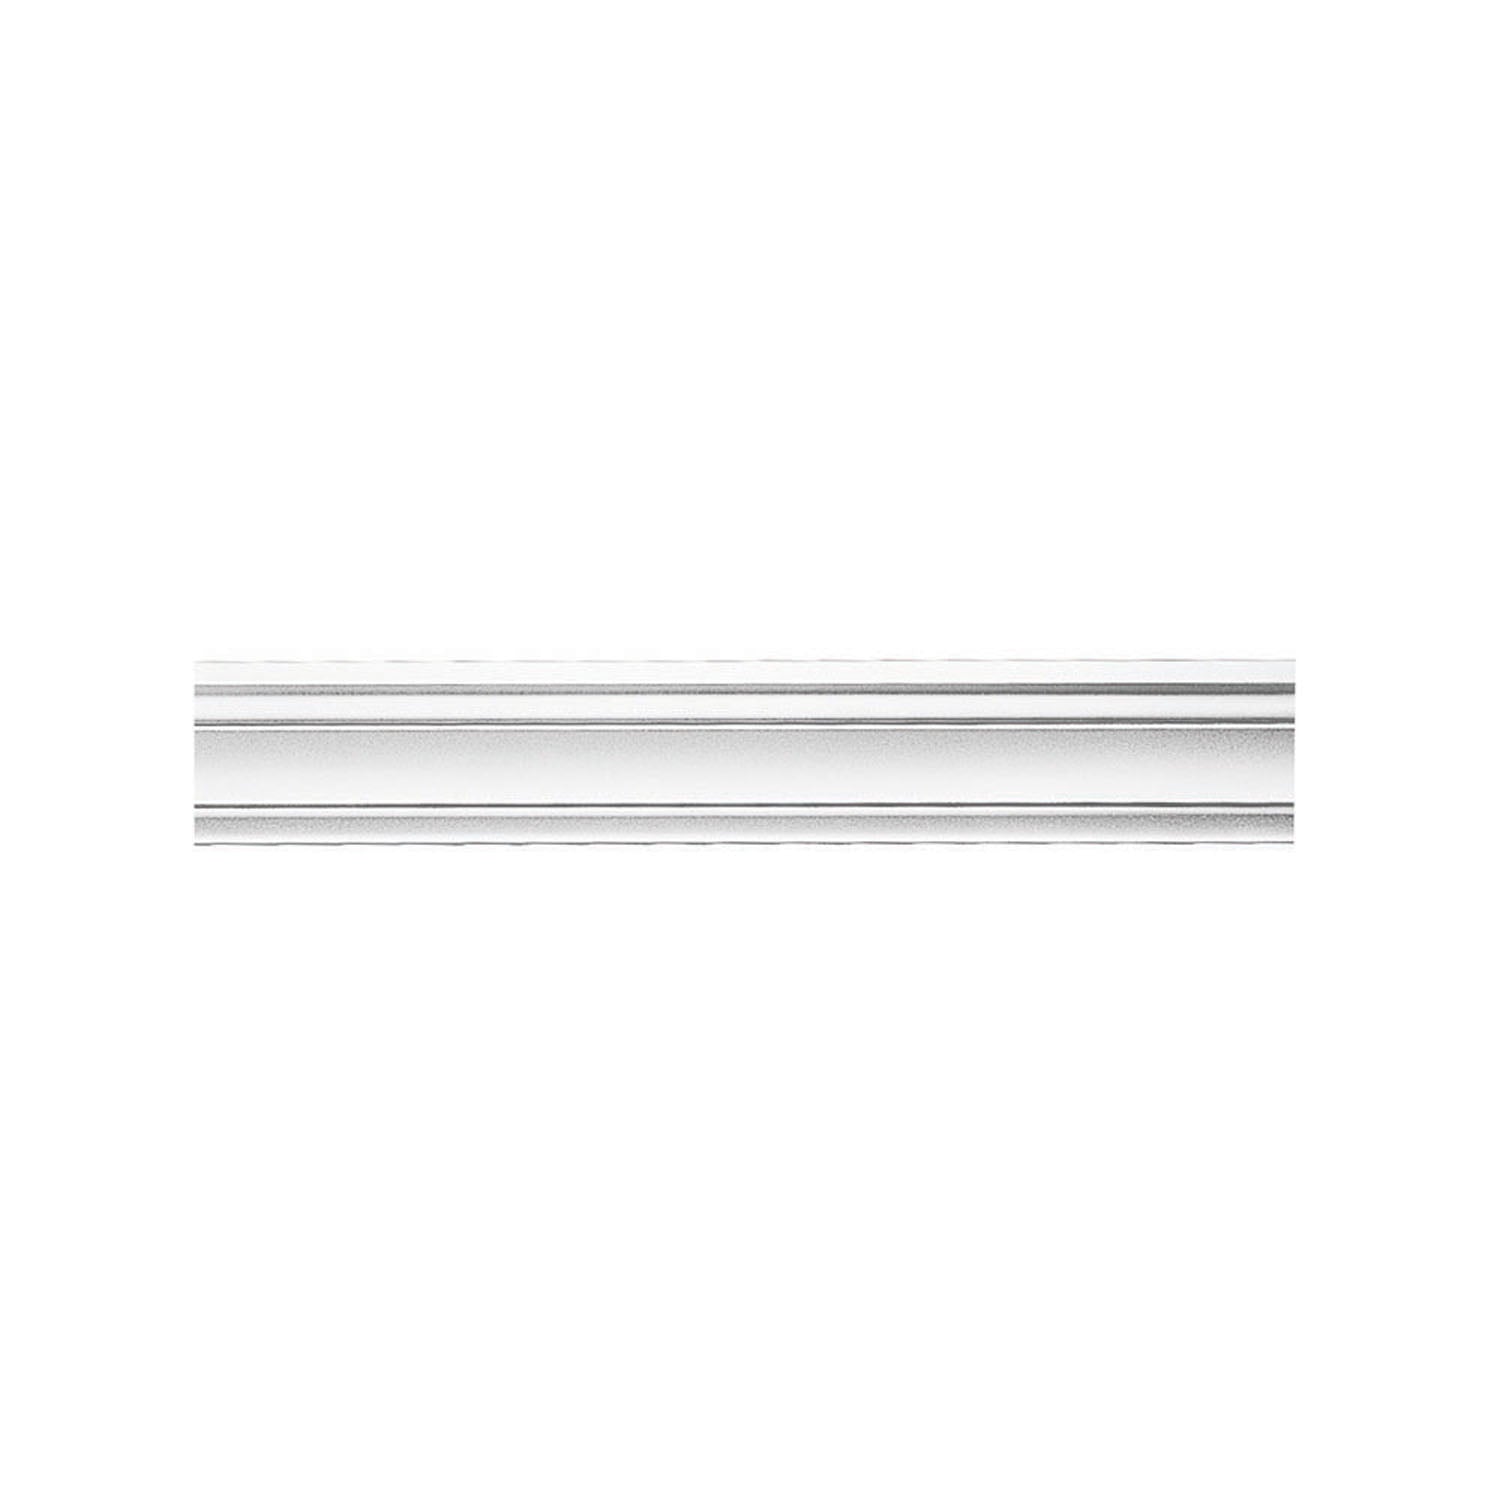 Focal Point Lighting 10670-8 Crown Cove Decor White